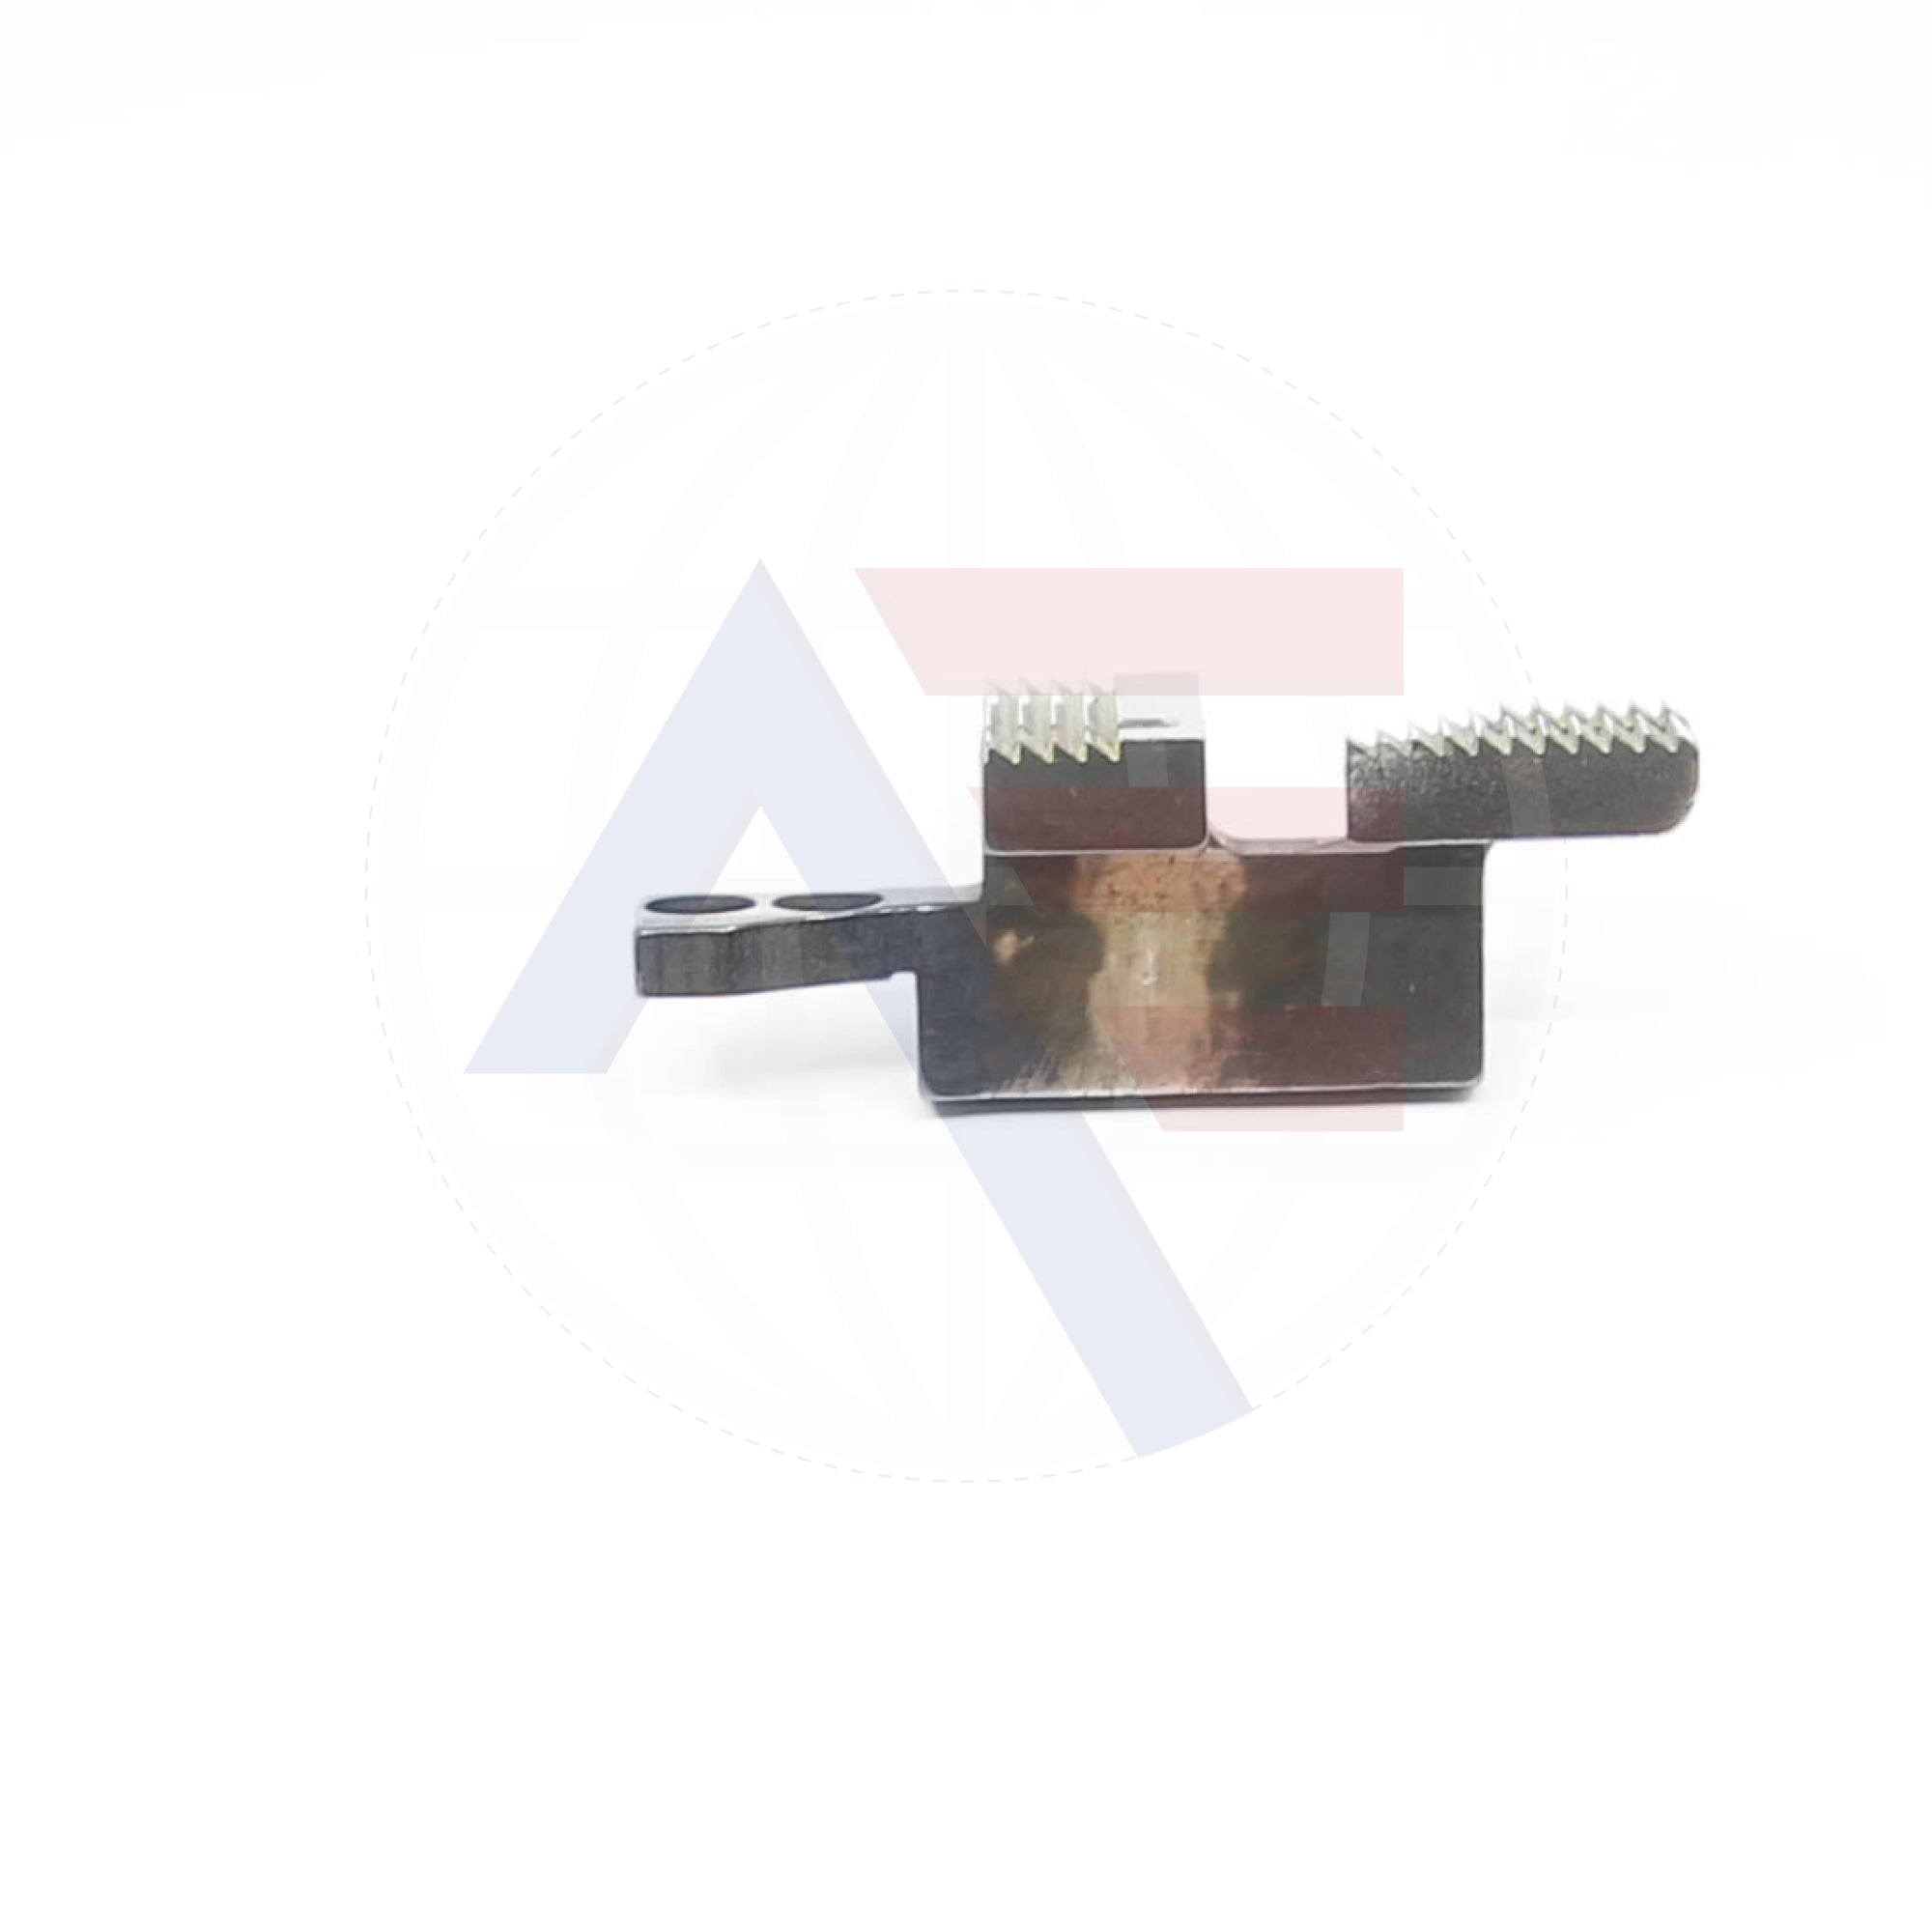 Aee1 Feed Dog Sewing Machine Spare Parts